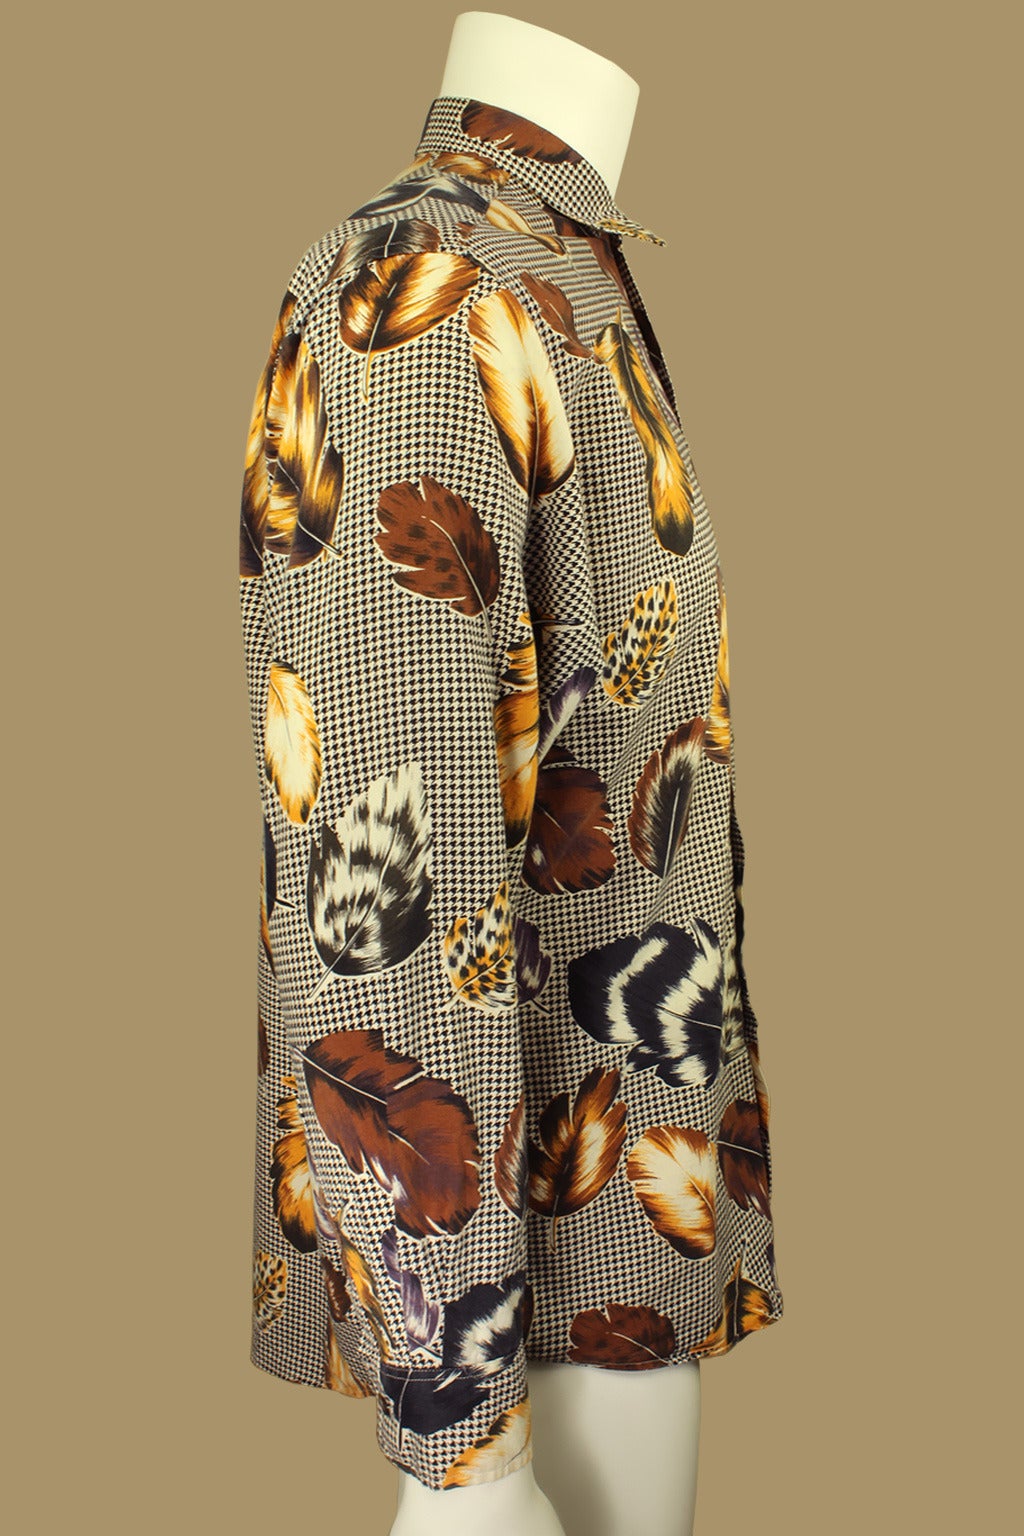 Paul Smith is a master at prints and this is a perfect example. Printed over a black and white herringbone background are bold photo print feathers in animal prints. This shirt is a classic cut in soft cotton/rayon blend.